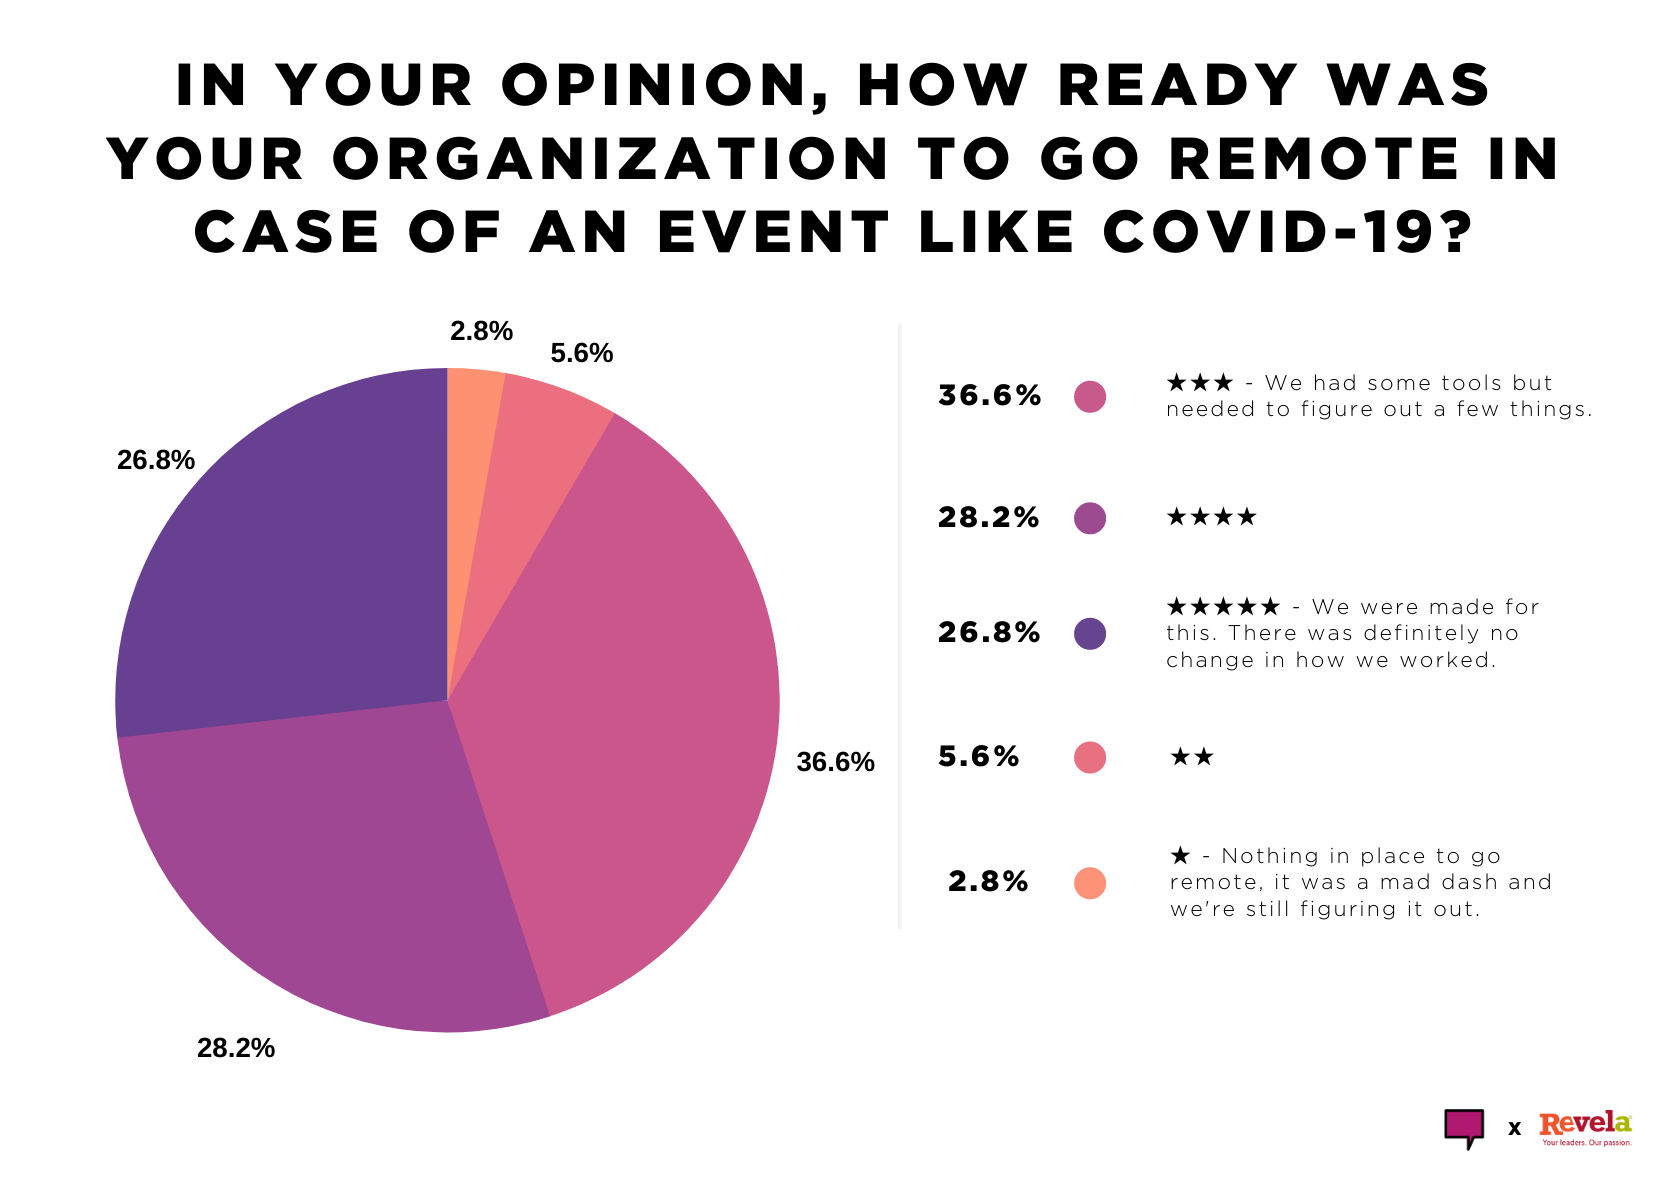 In your opinion, how ready was your organization to go remote in case of an event like COVID-19?